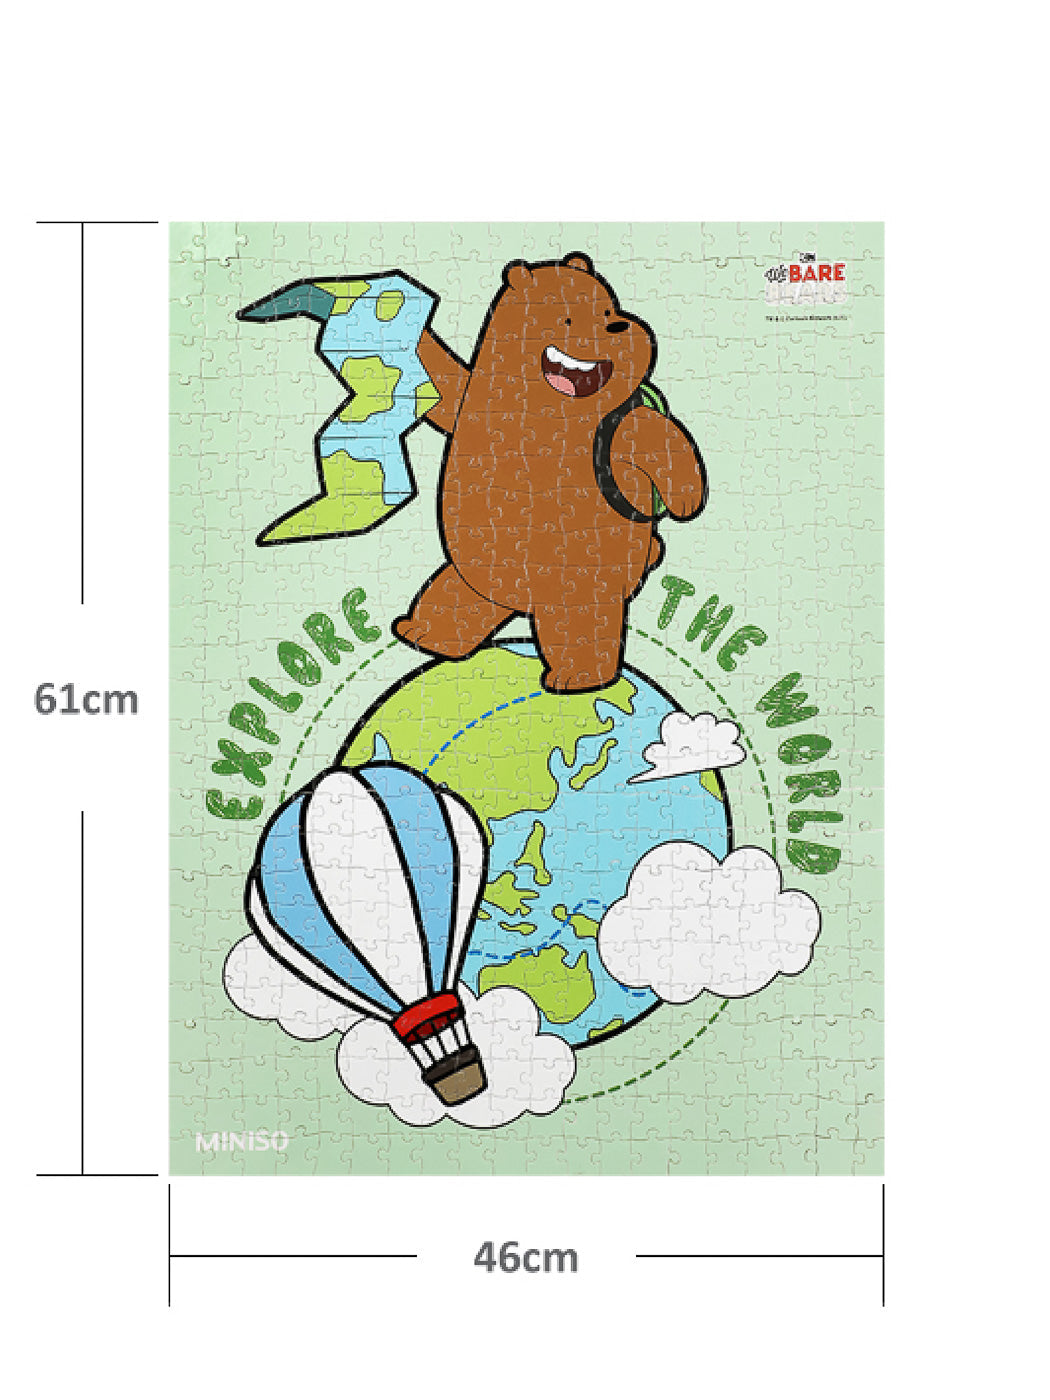 MINISO WE BARE BEARS 500 PIECES PUZZLE ( GRIZZLY ) 2010033811106 DIY PUZZLE